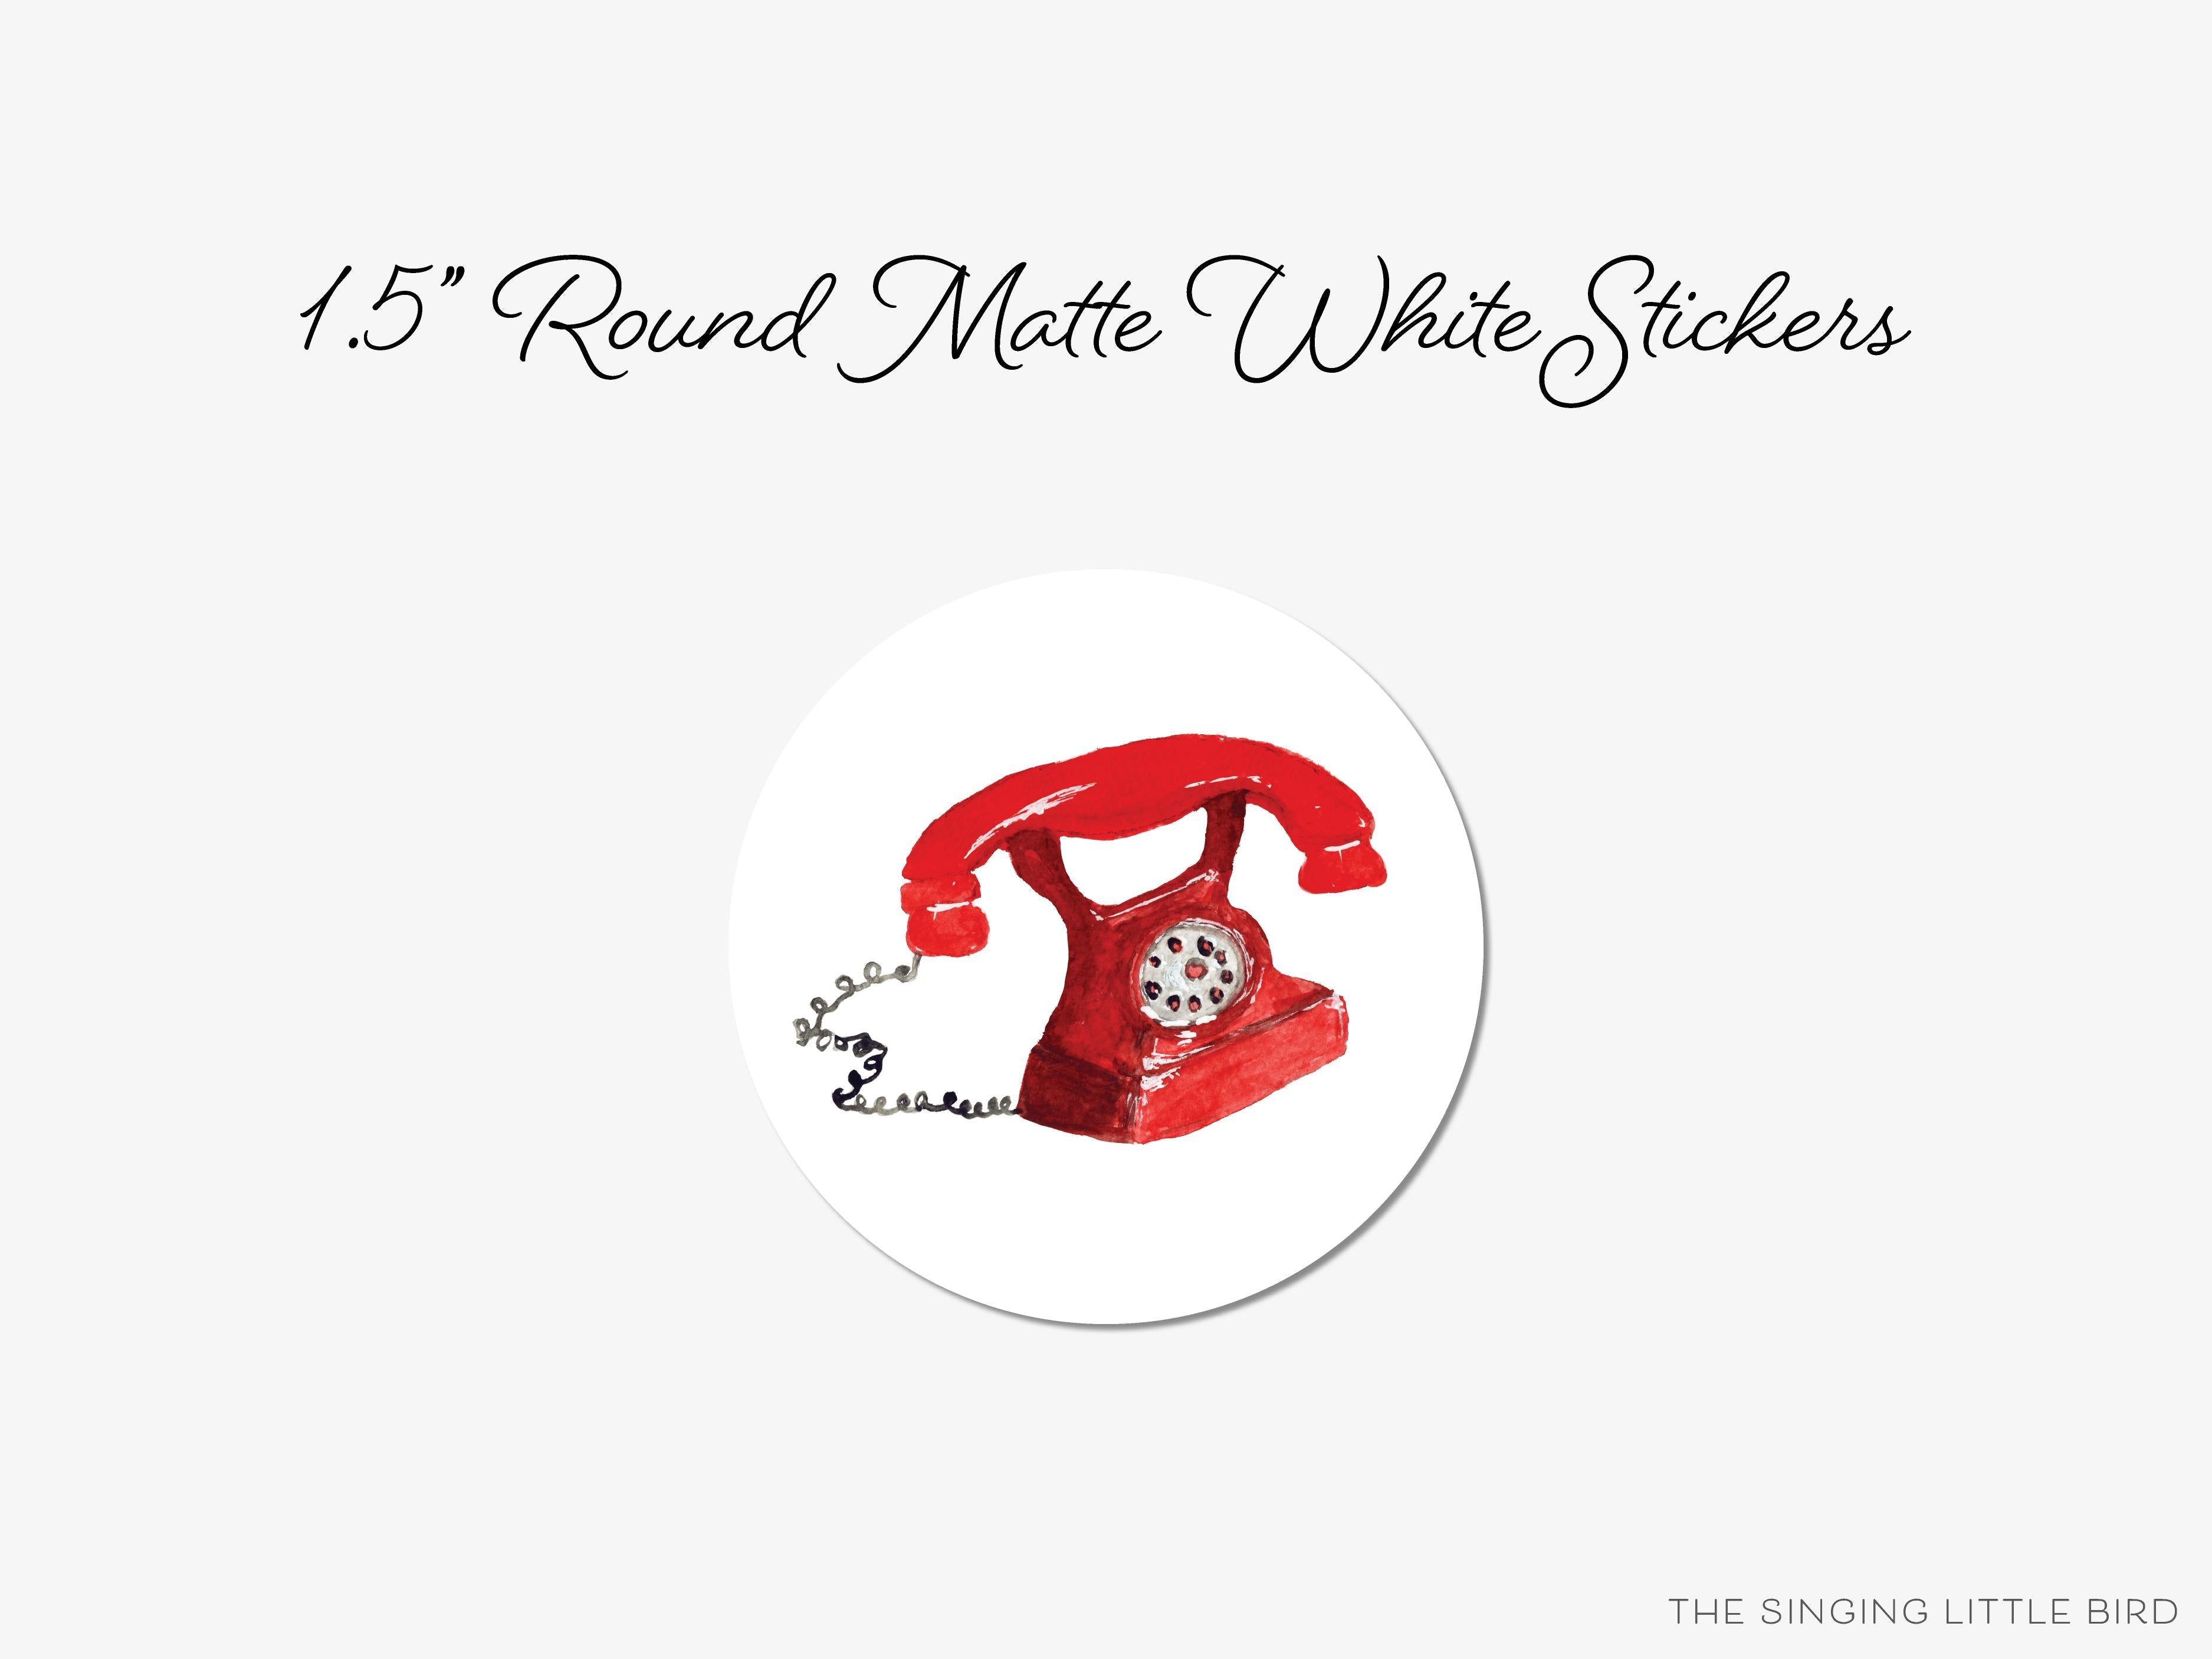 Vintage Telephone Round Stickers-These matte round stickers feature our hand-painted watercolor Vintage Telephone, making great envelope seals or gifts for the vintage lover in your life.-The Singing Little Bird